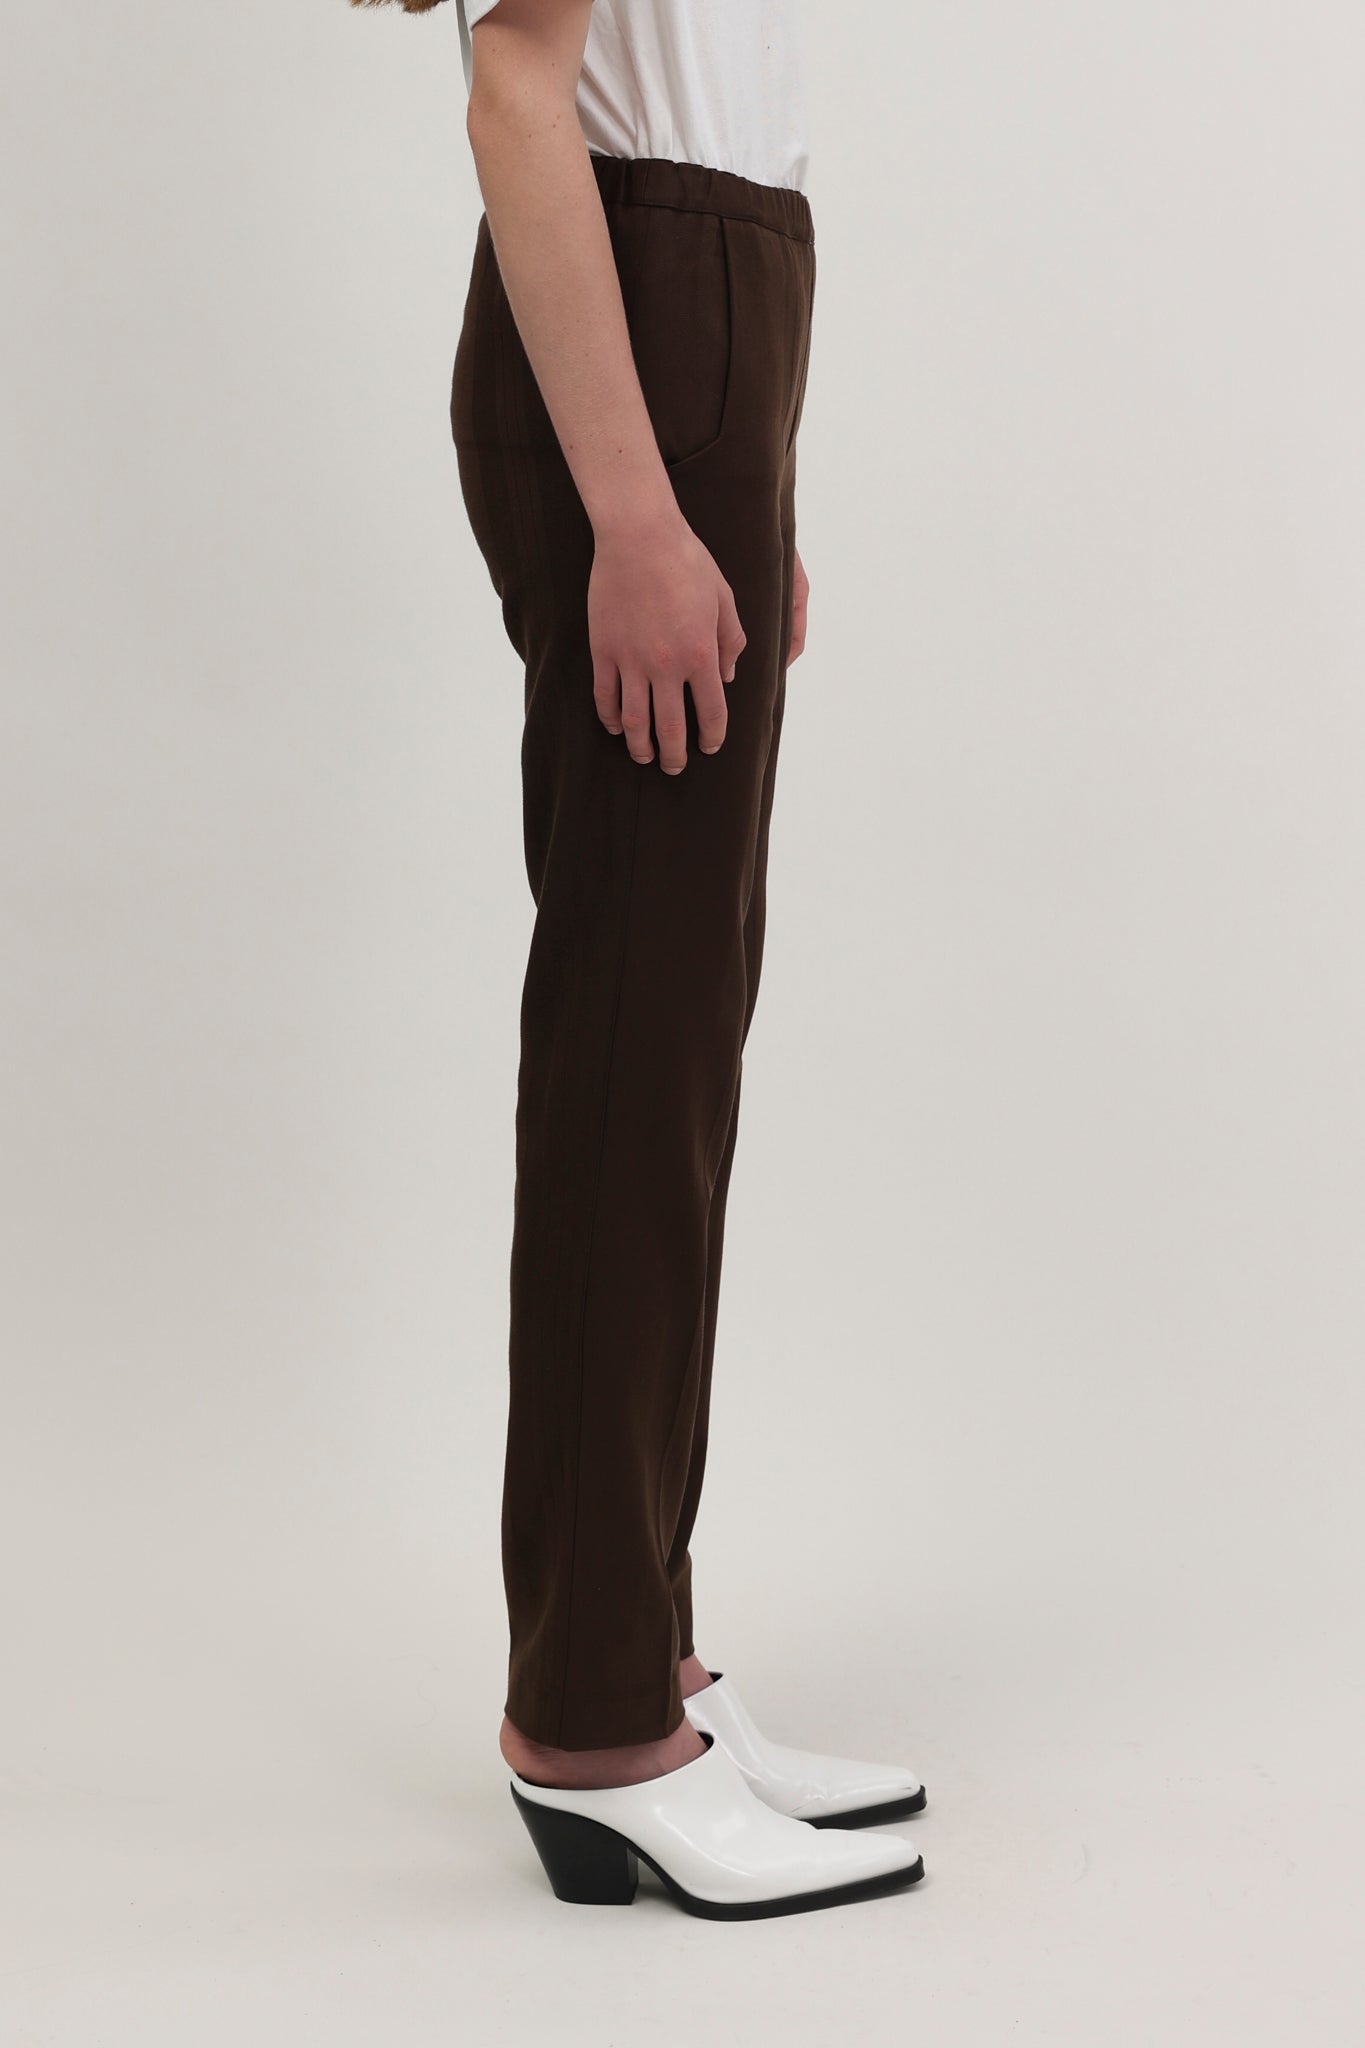 Nore Trousers Chocolate Brown